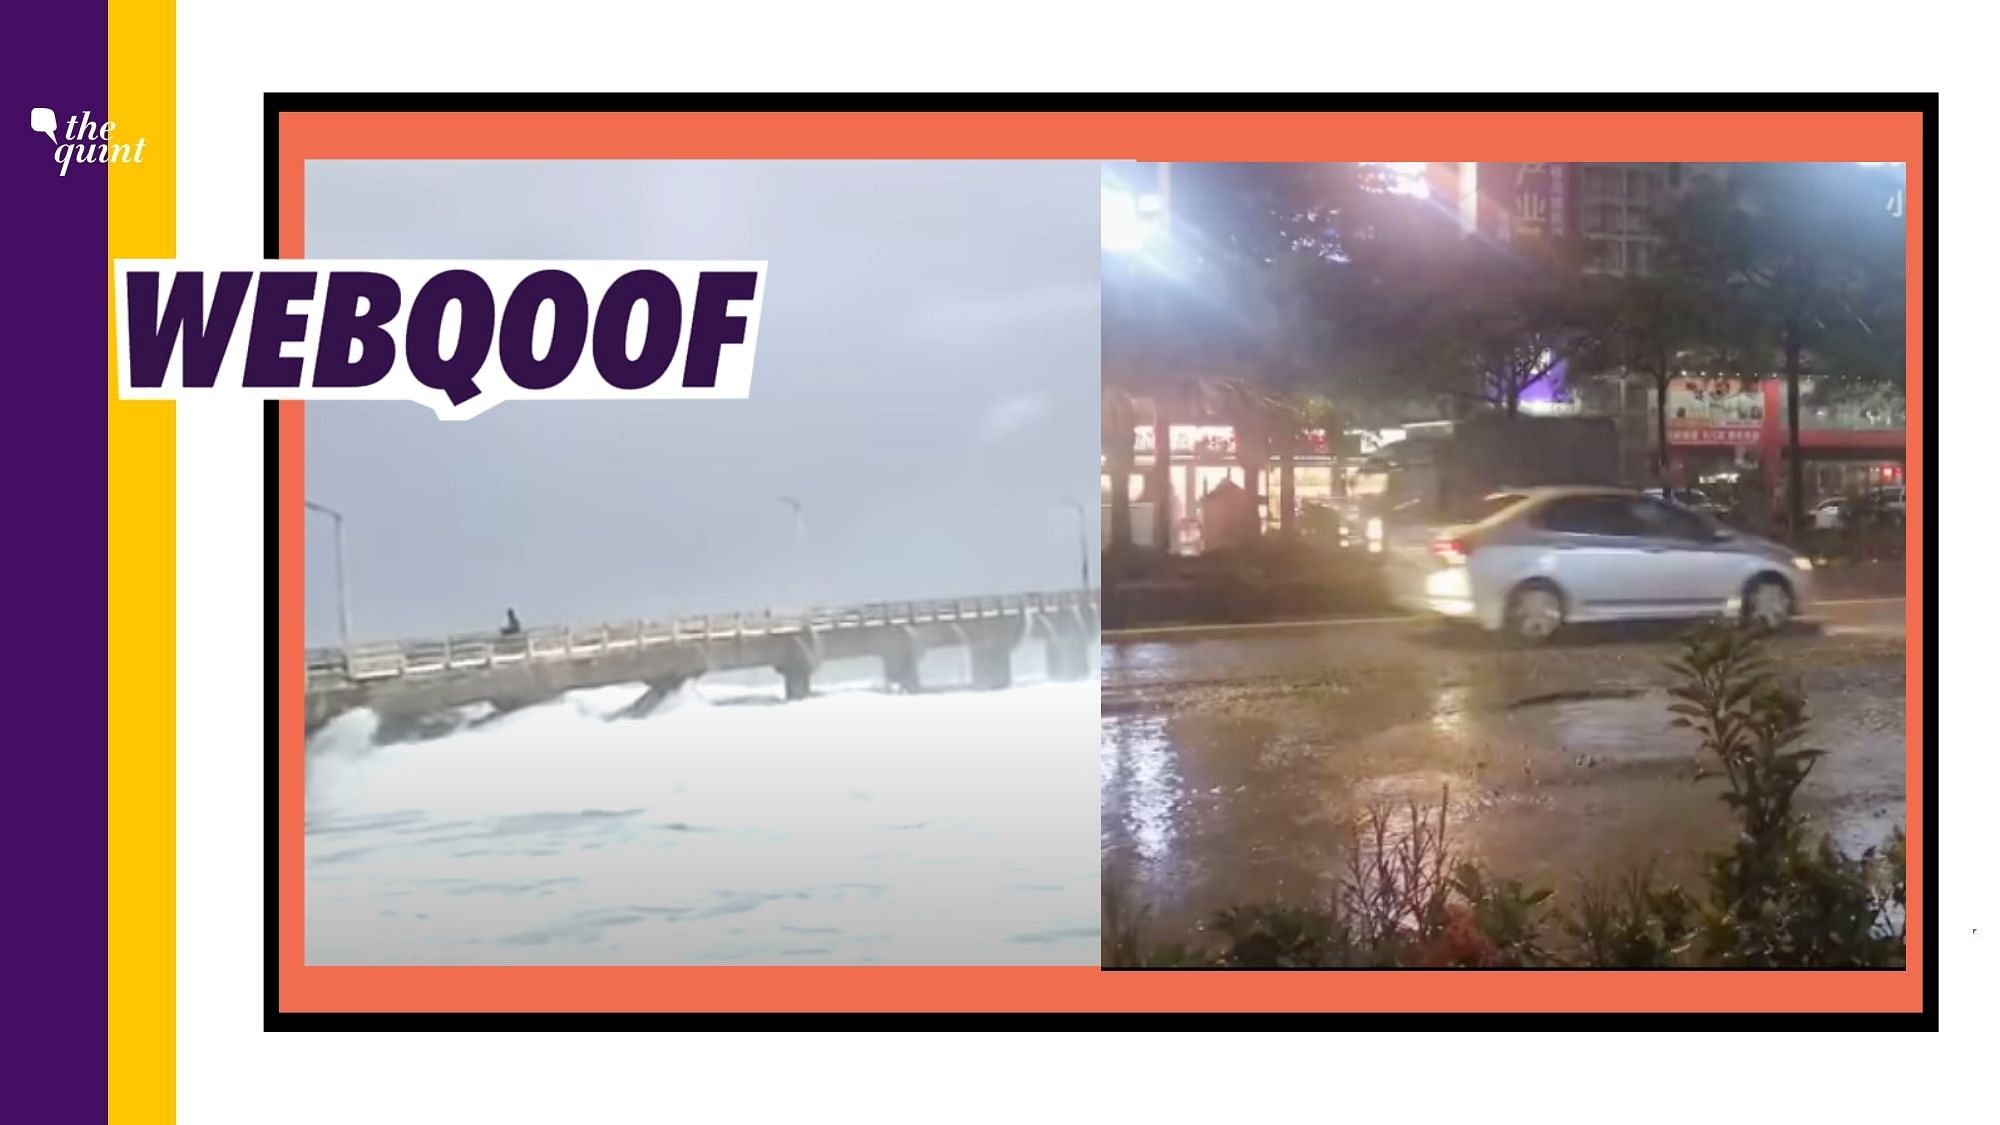 Old and unrelated videos are being used to show the current situation of Mumbai due to the rains.